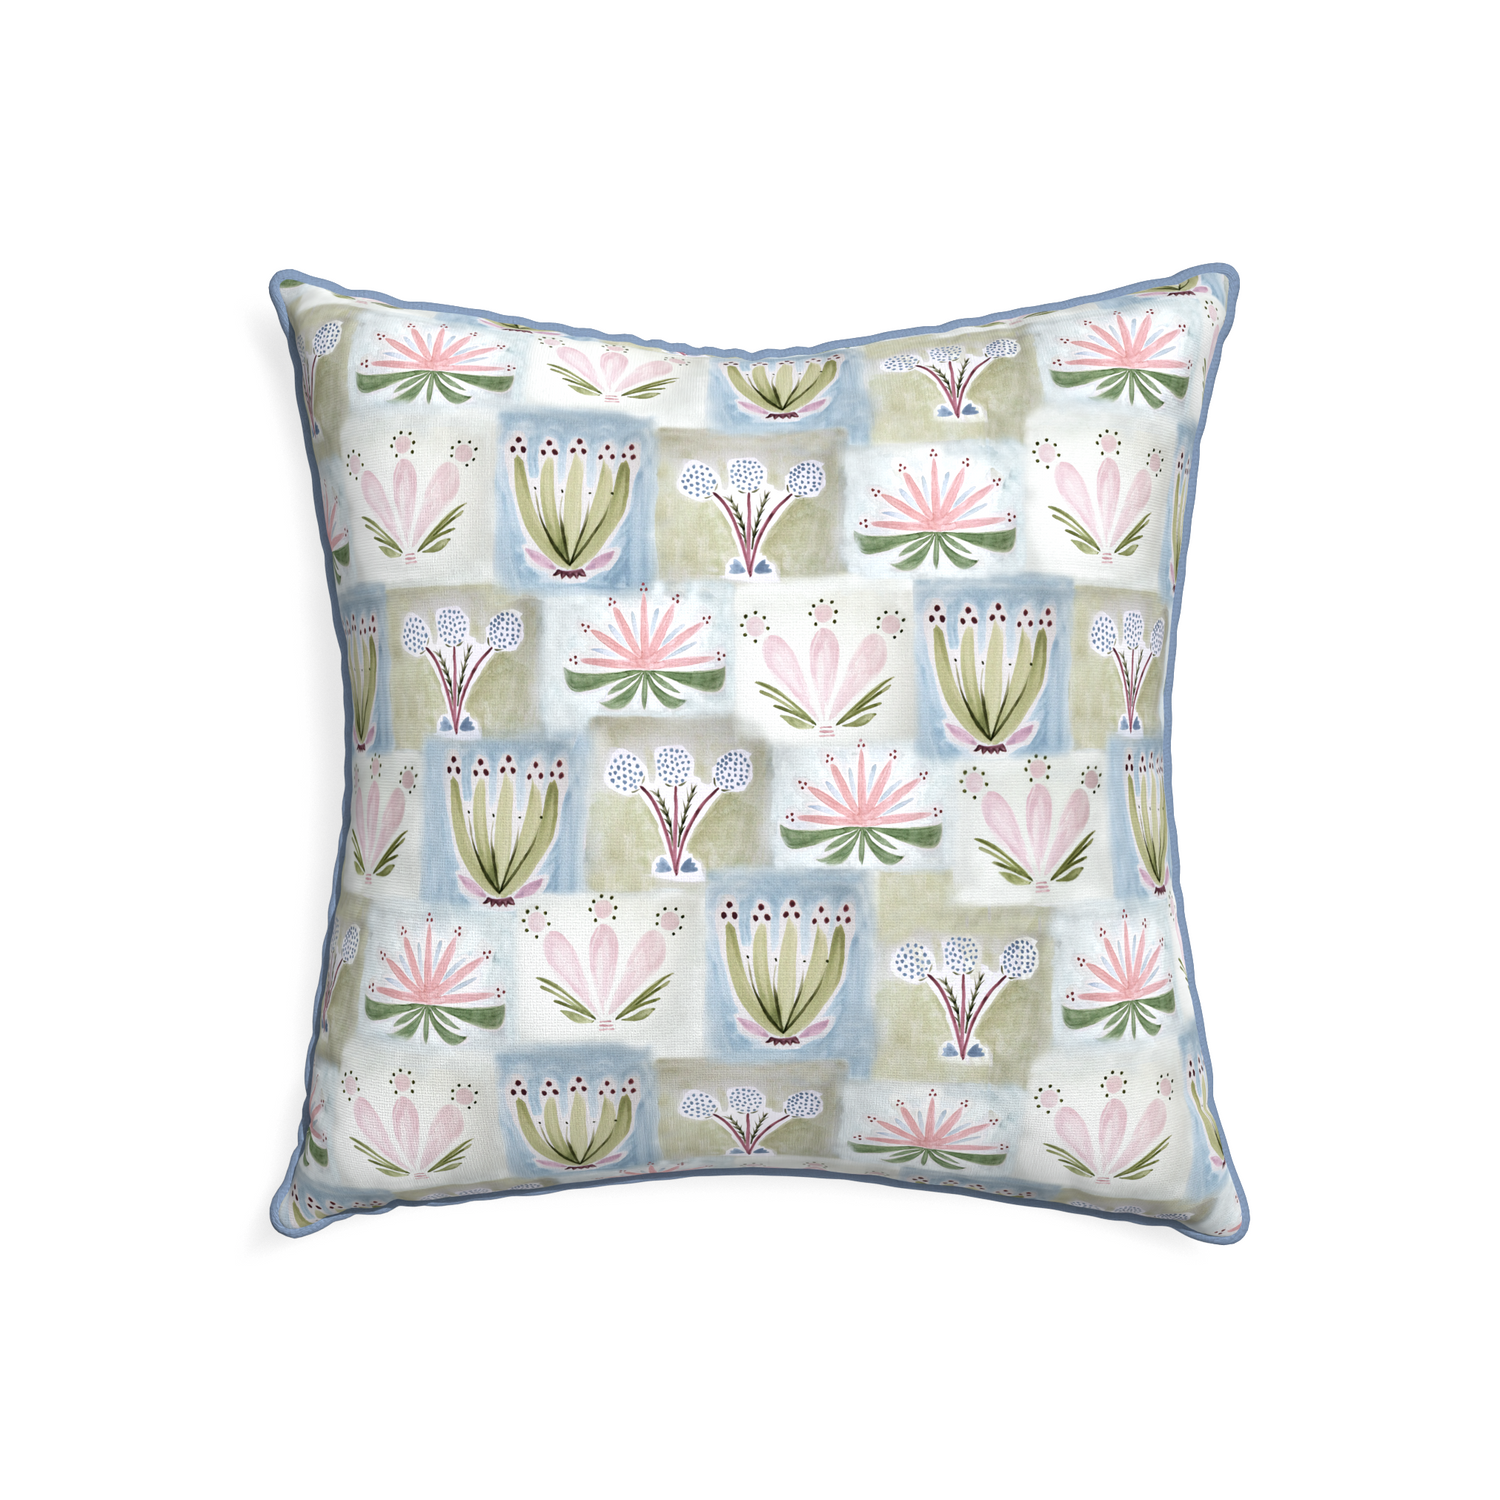 22-square harper custom hand-painted floralpillow with sky piping on white background